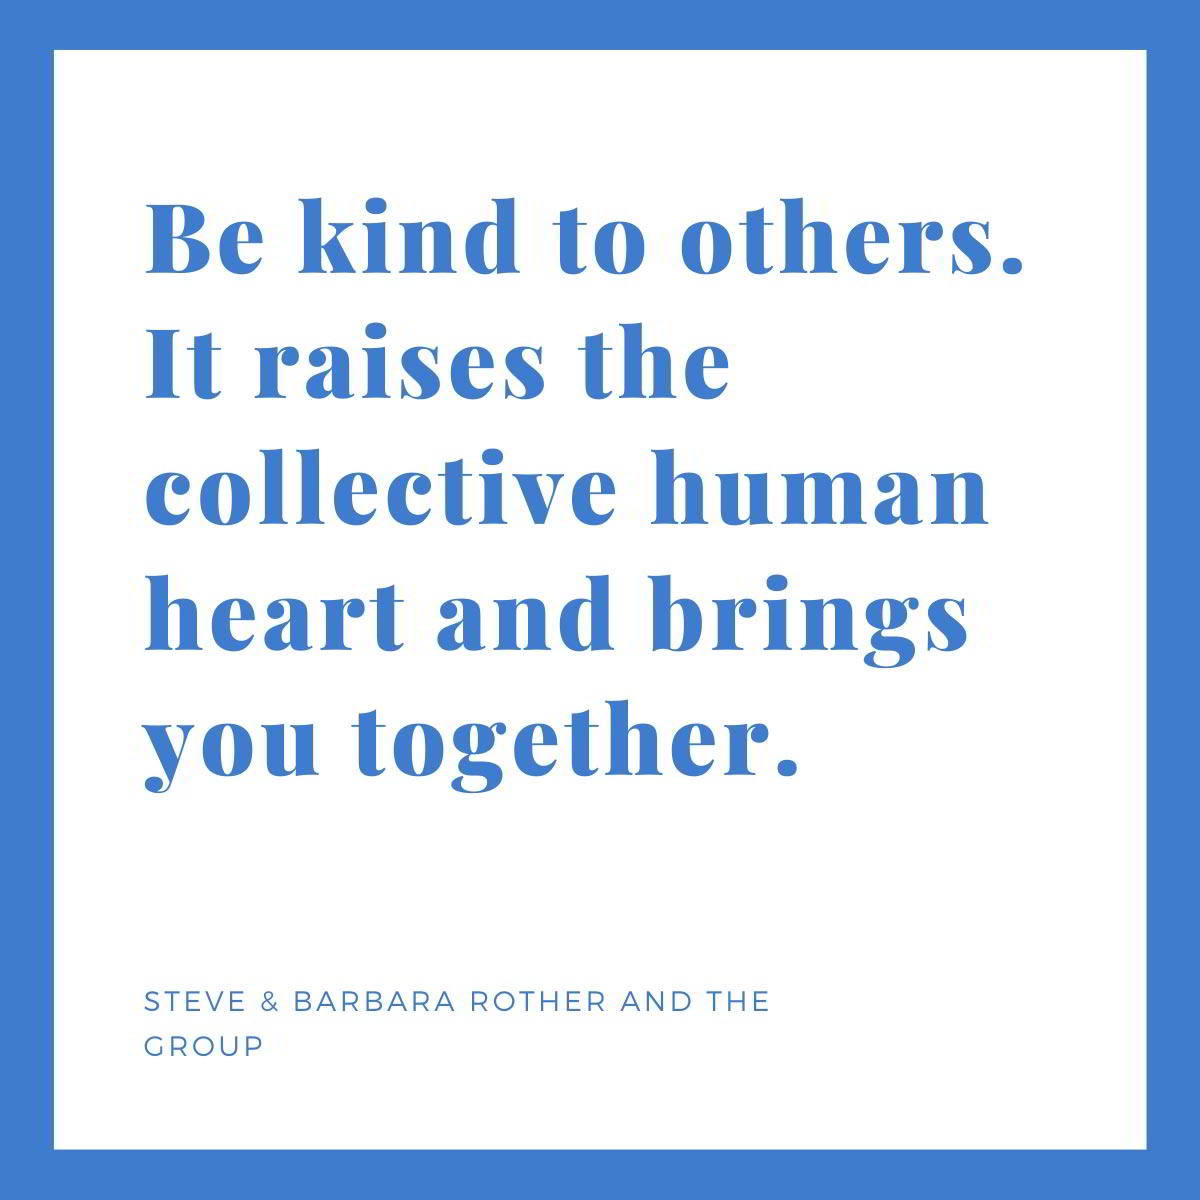 Be kind to others quotes